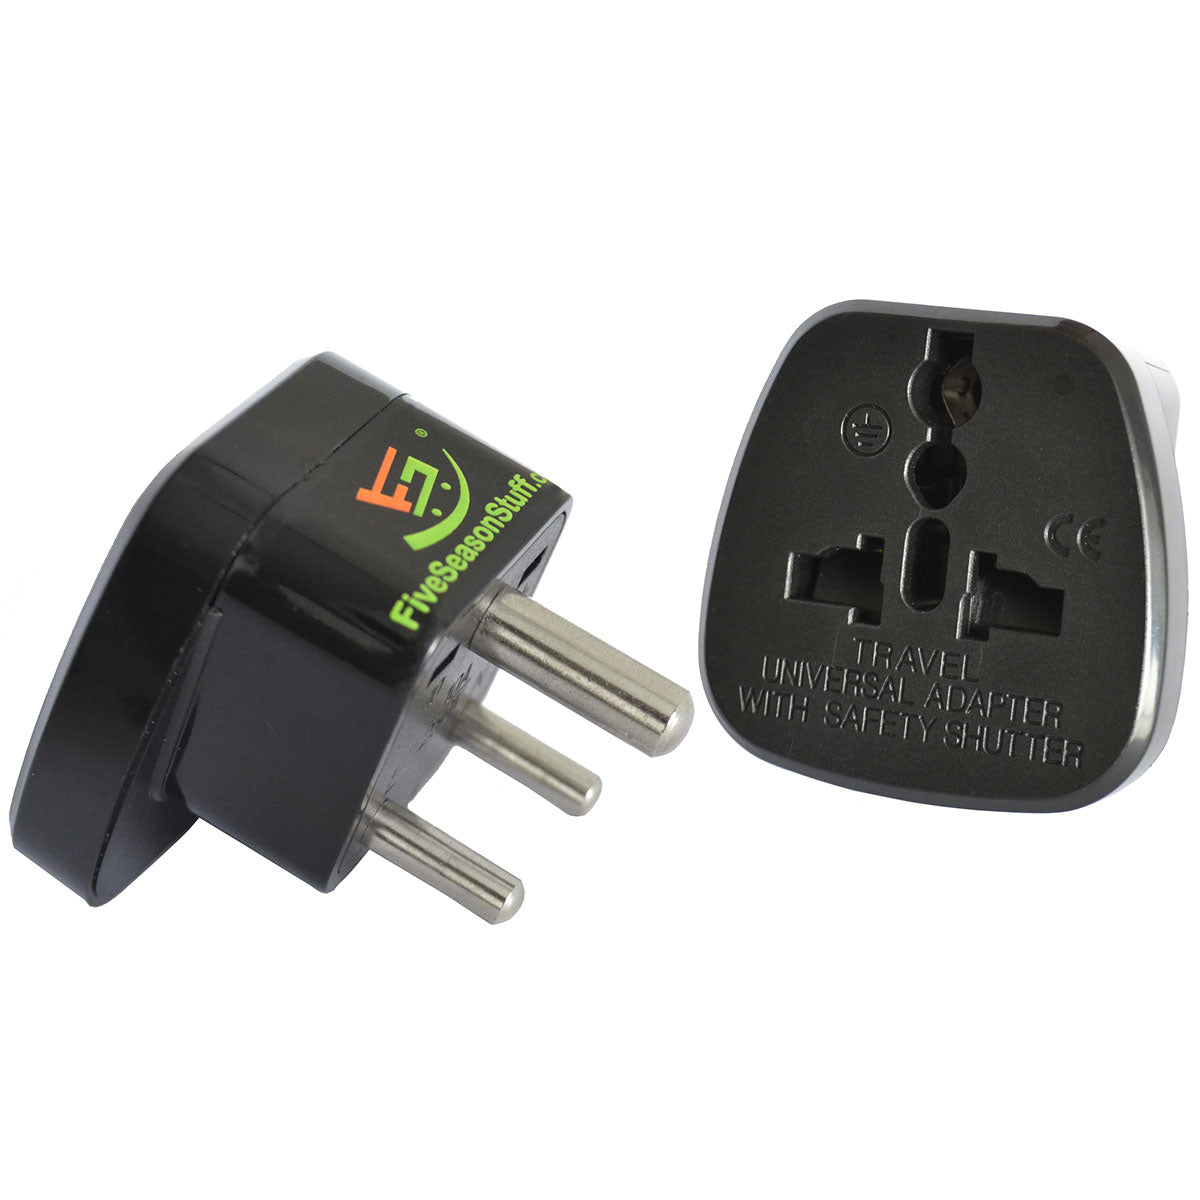 1 Travel Adapter for Traveling to South Africa (Black) Type D